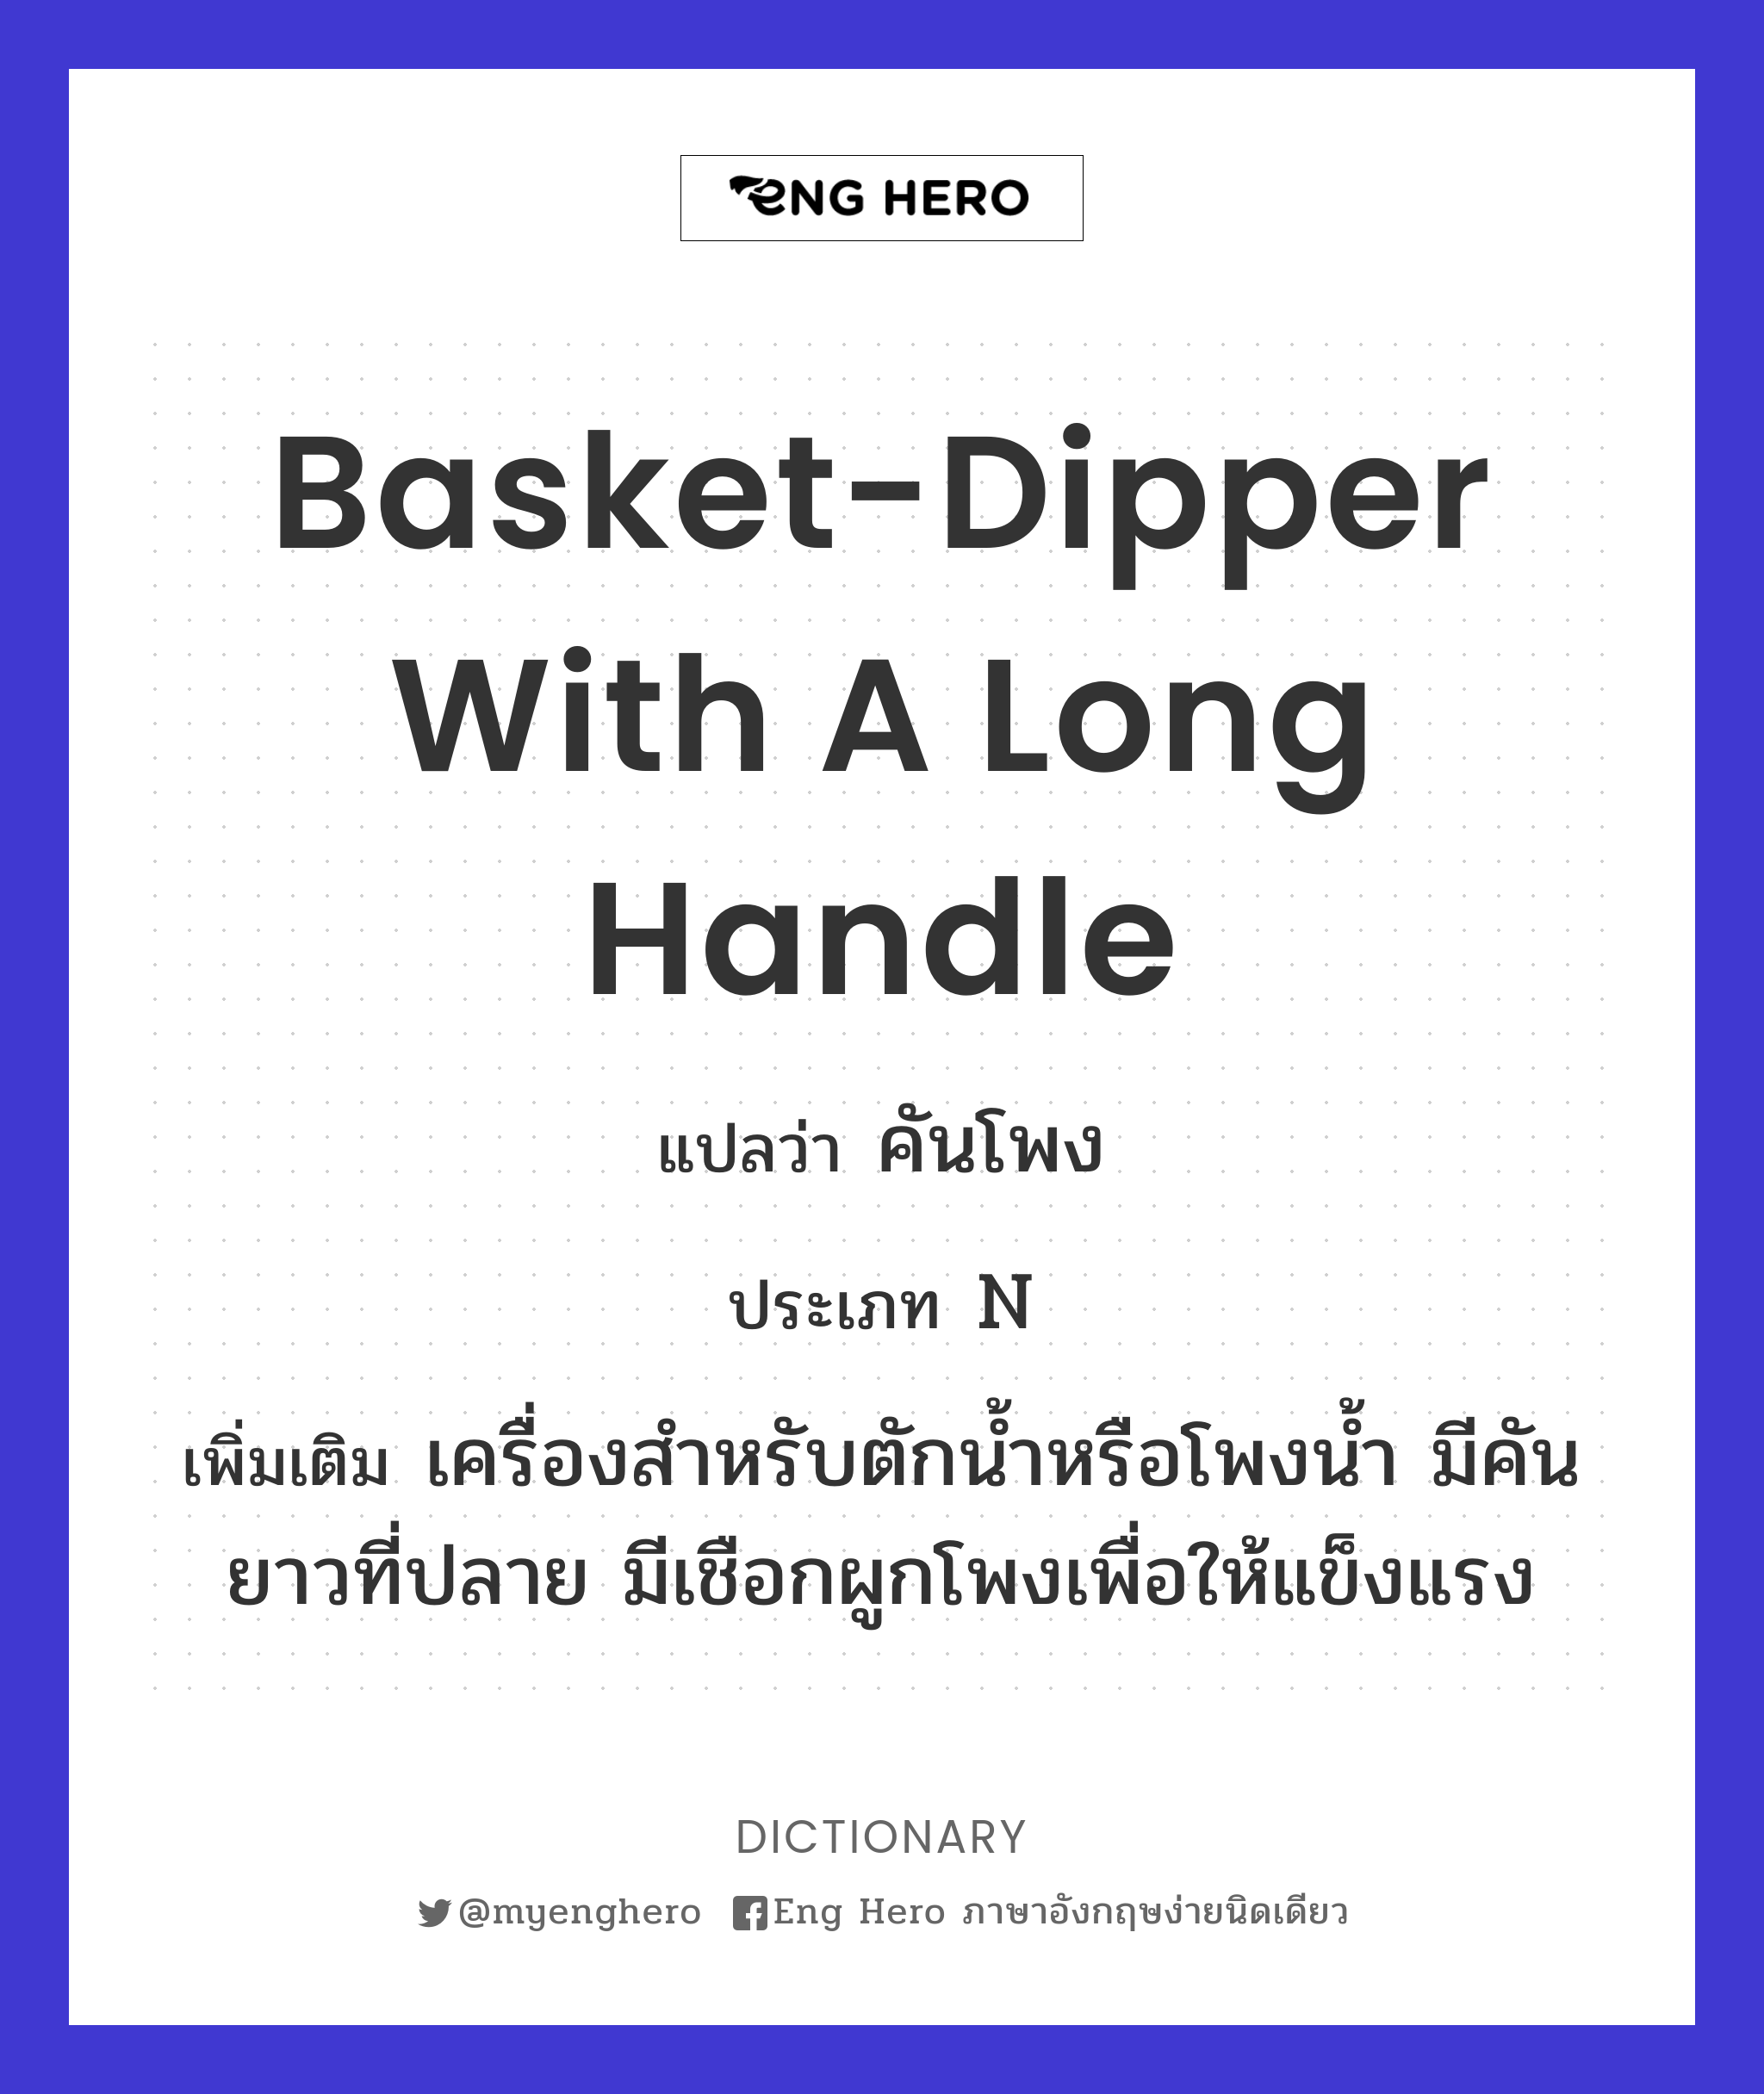 basket-dipper with a long handle